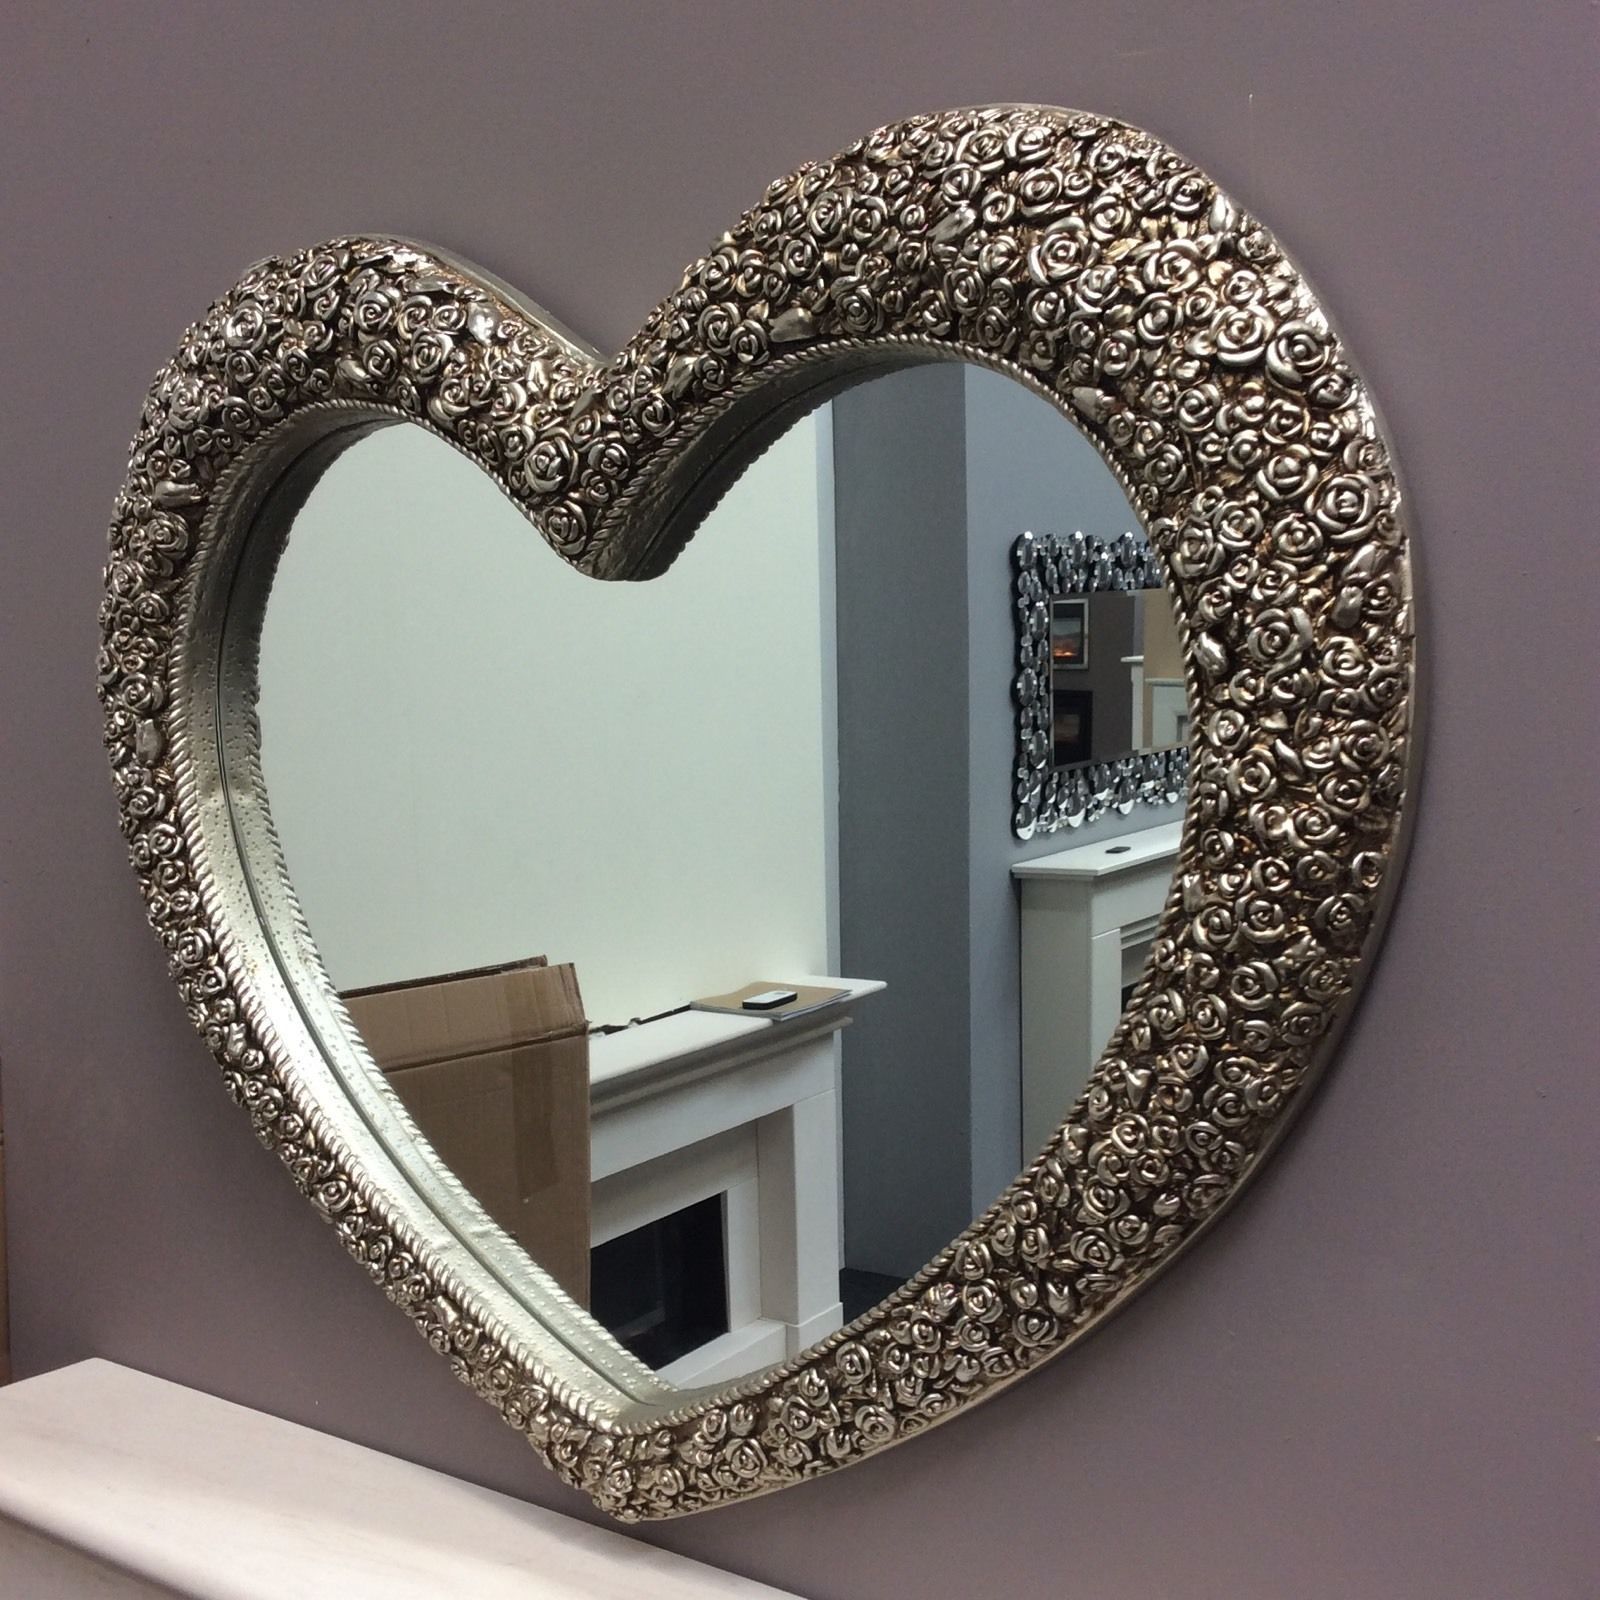 X Large Heart Mirror Stunning Ornate Elegant Mirror With Decorative Inside Accent Mirrors (Photo 3 of 15)